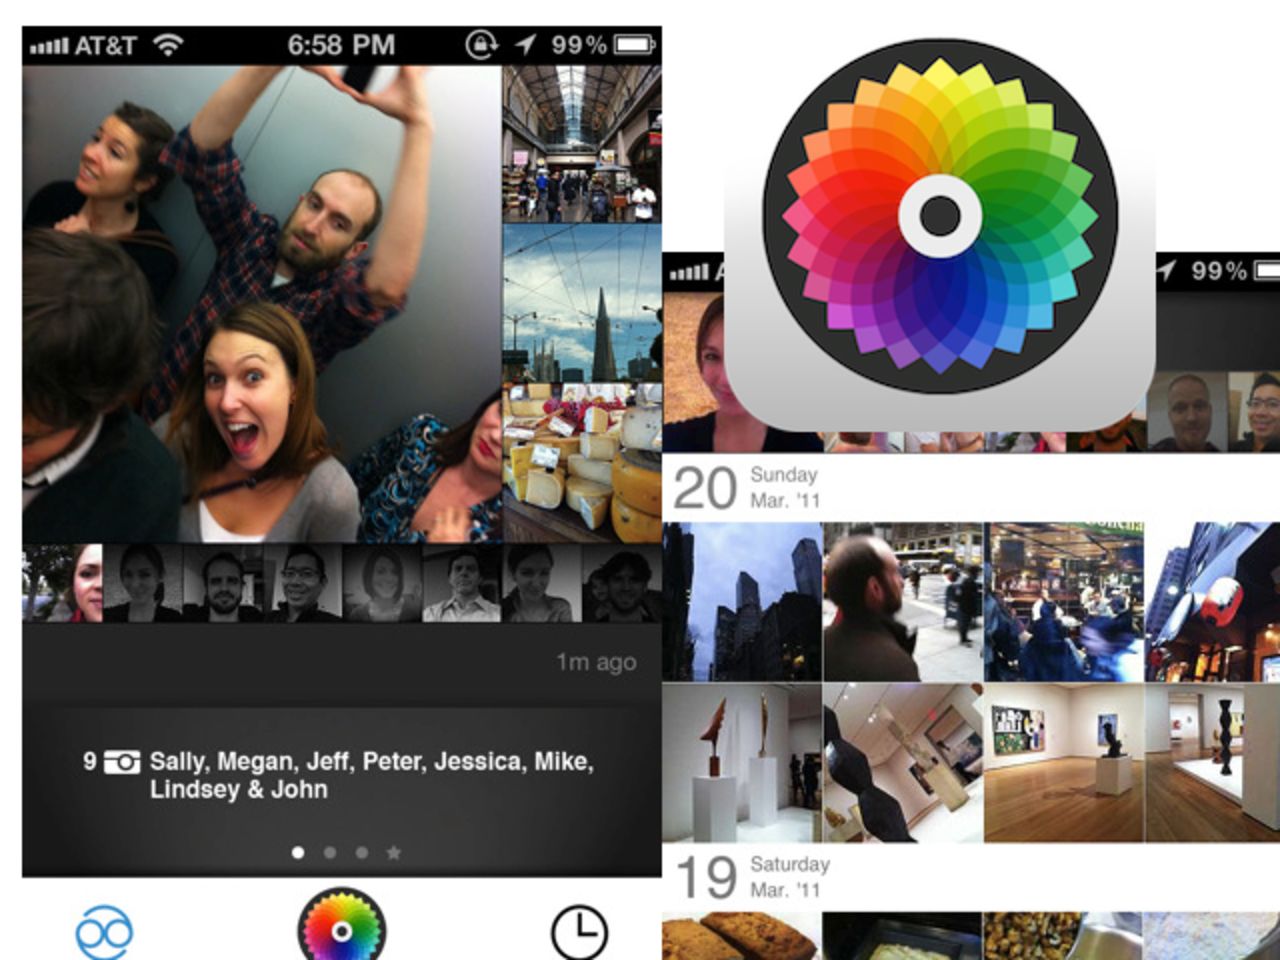 Remember the Color photo-sharing app that arrived last year with much fanfare and millions in backing? No? It never caught on with users and will shut down December 31.